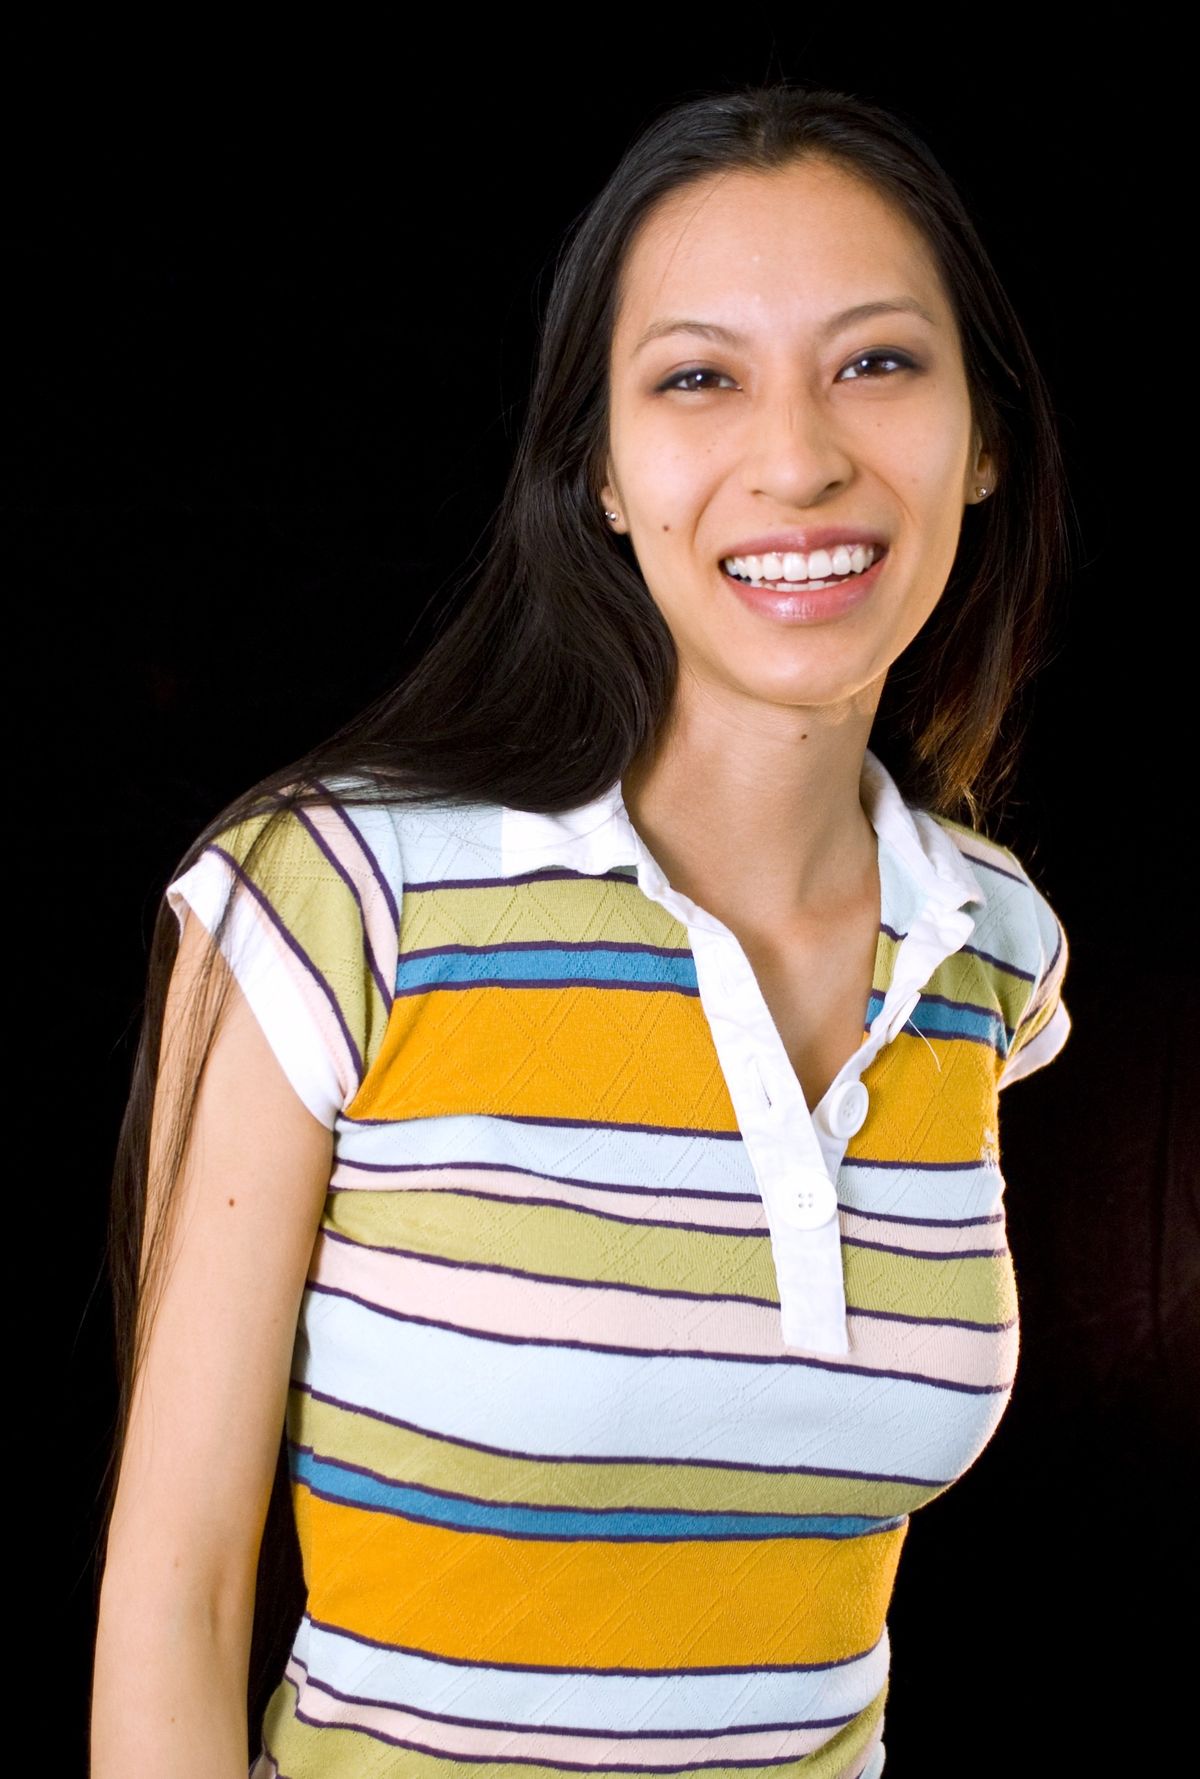 Dining Meets Data Thanks to OpenTable's Sr. Engineering Manager Karen Nguyen